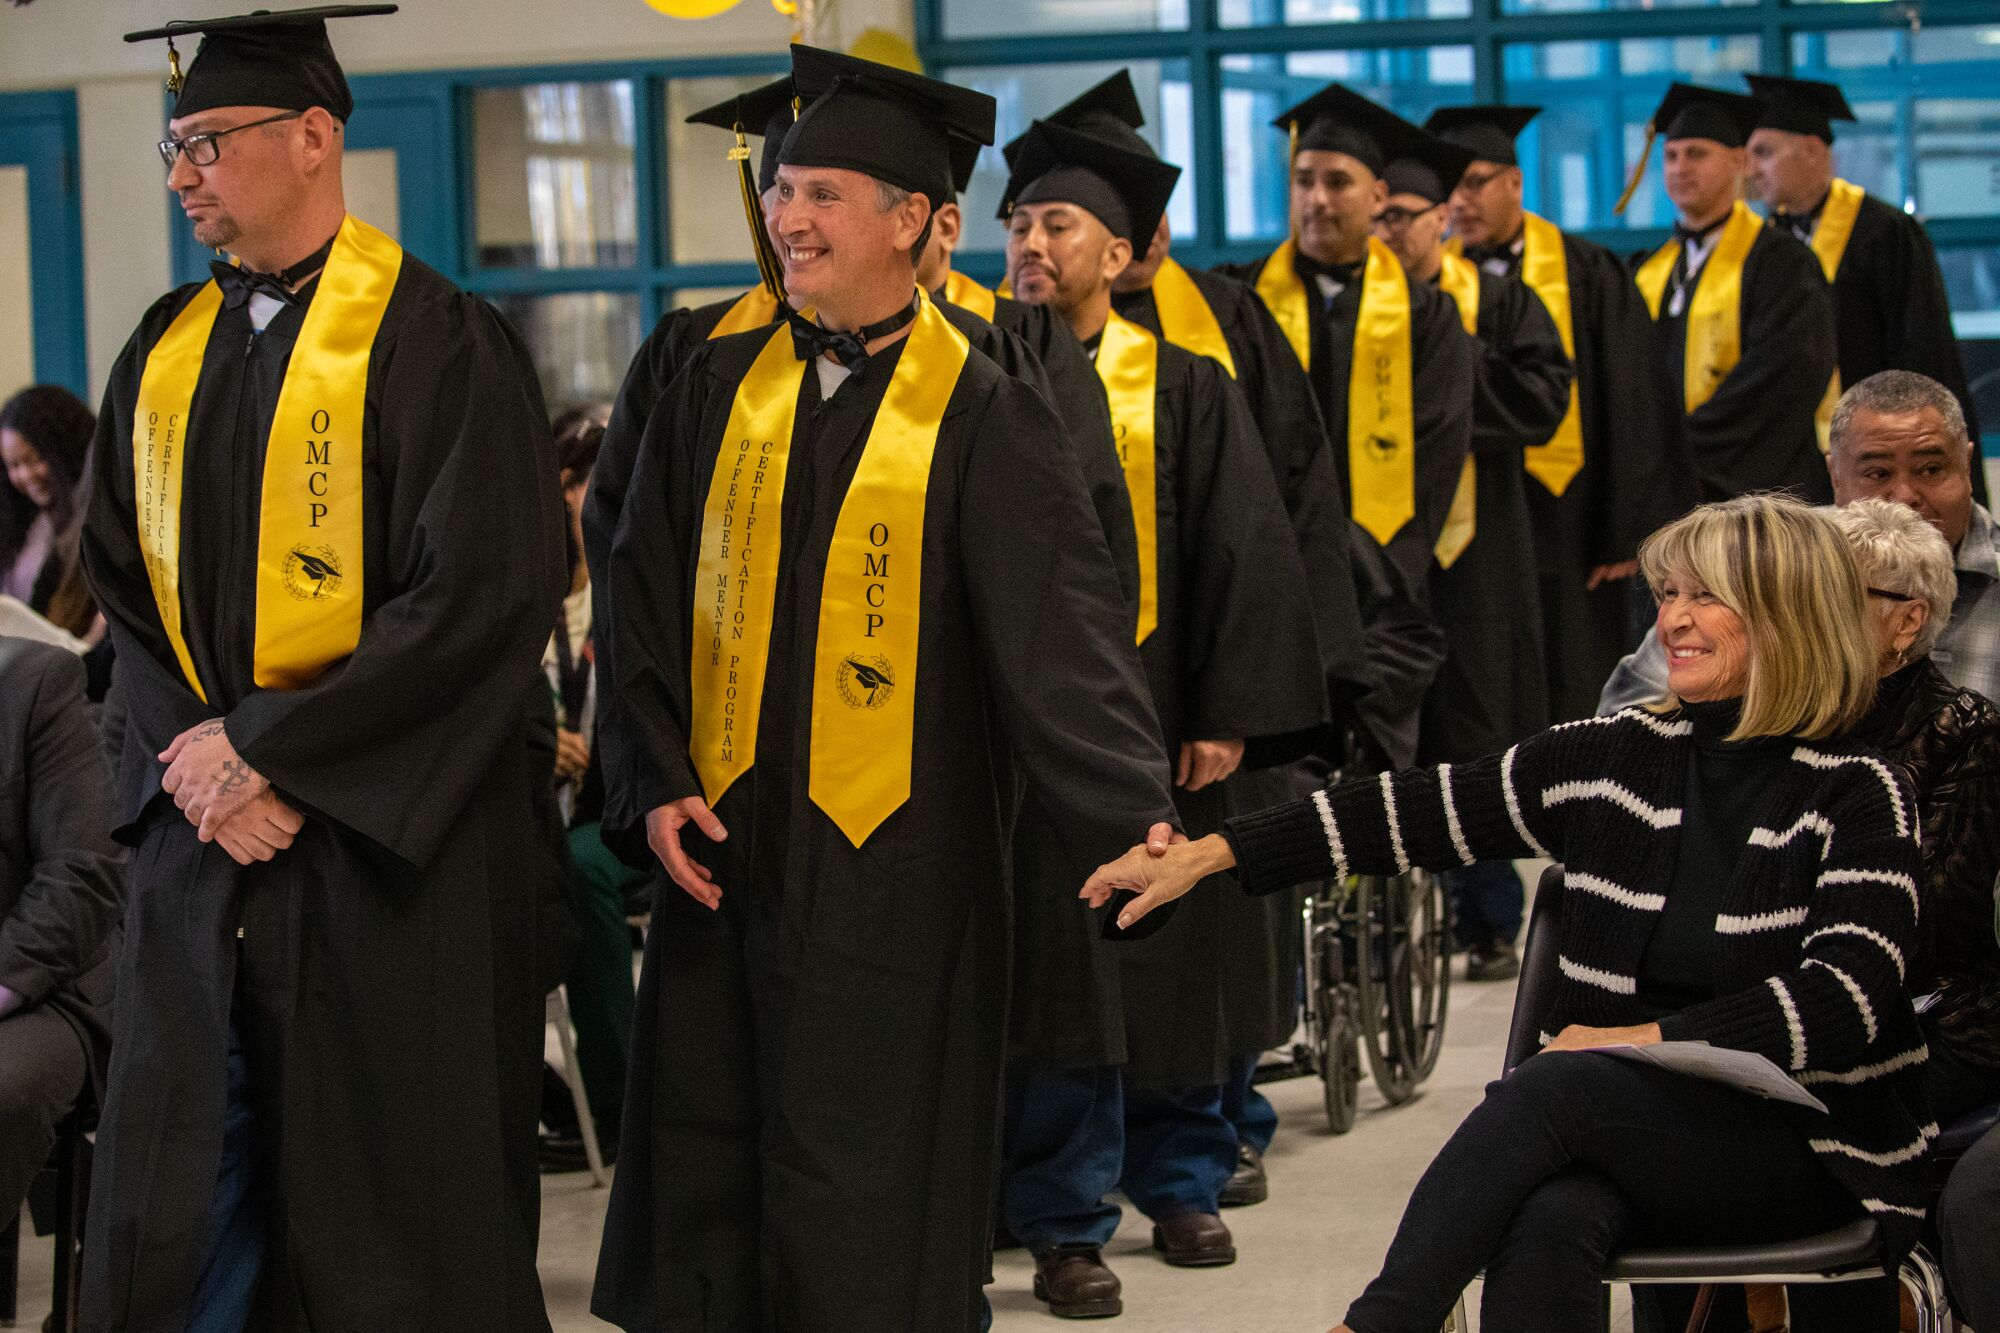 men in caps and gowns and yellow stoles smile as they walk down an aisle